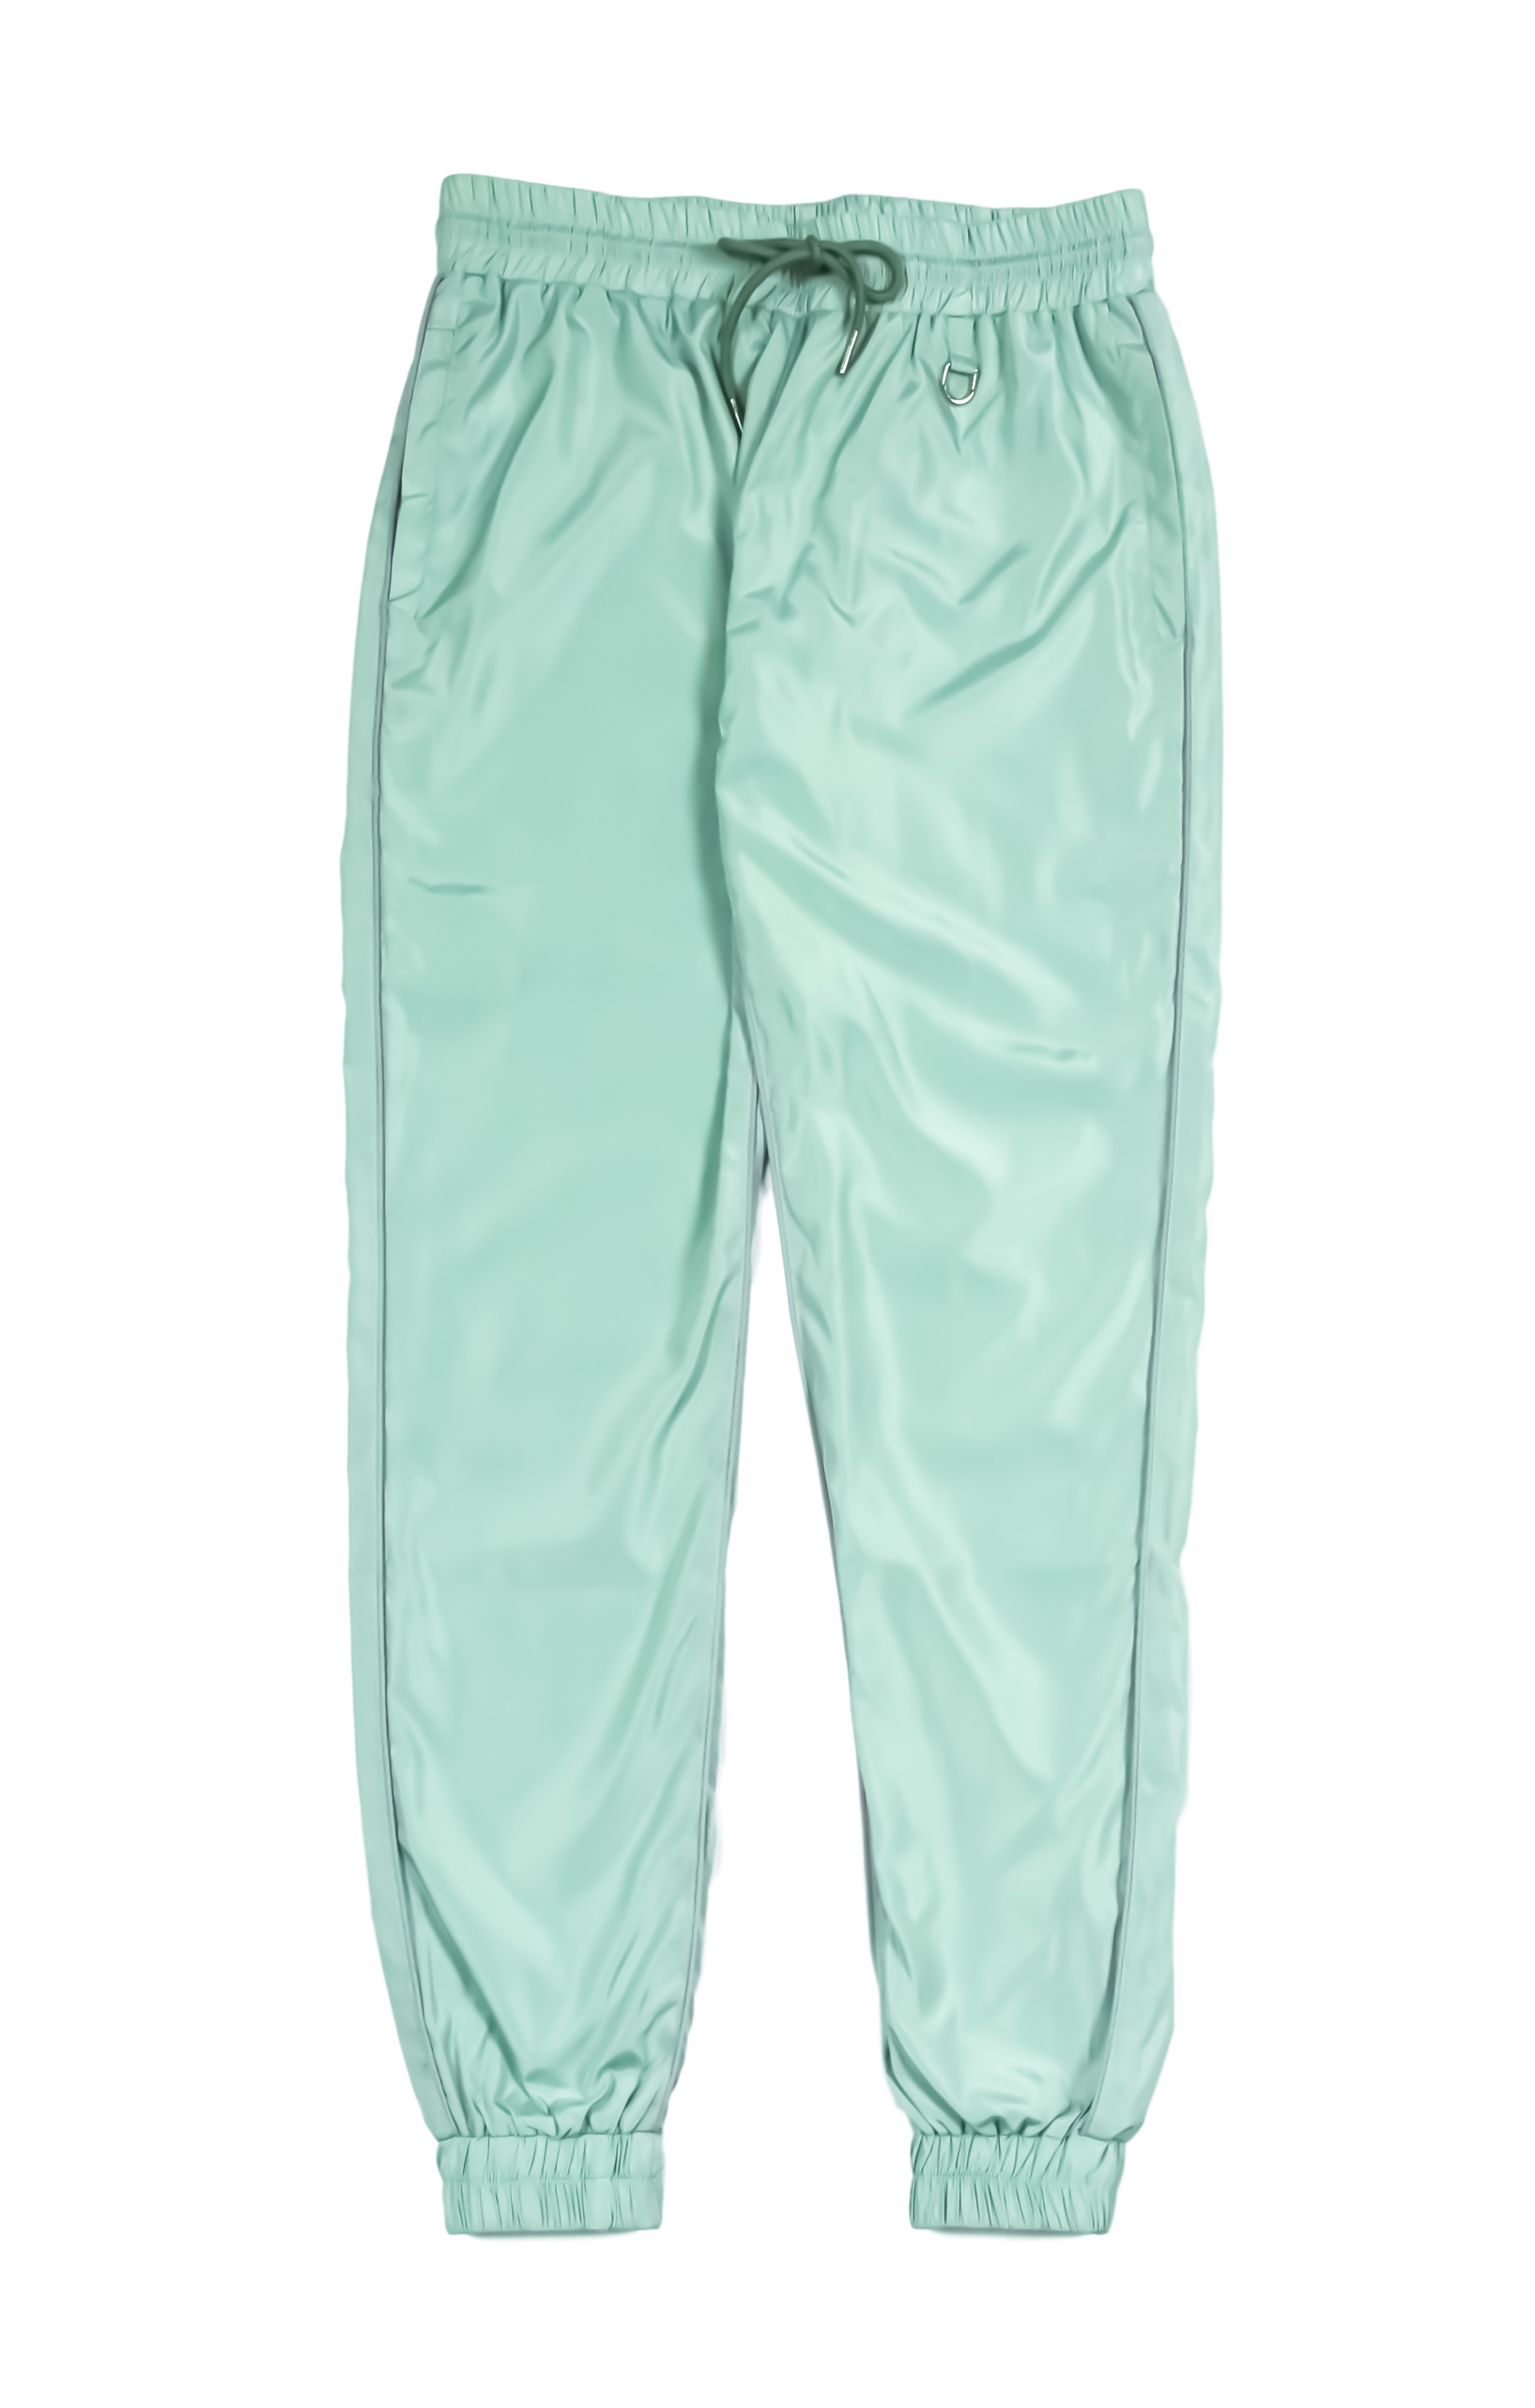 Surgeon Tracksuit Pants - INTL Collective